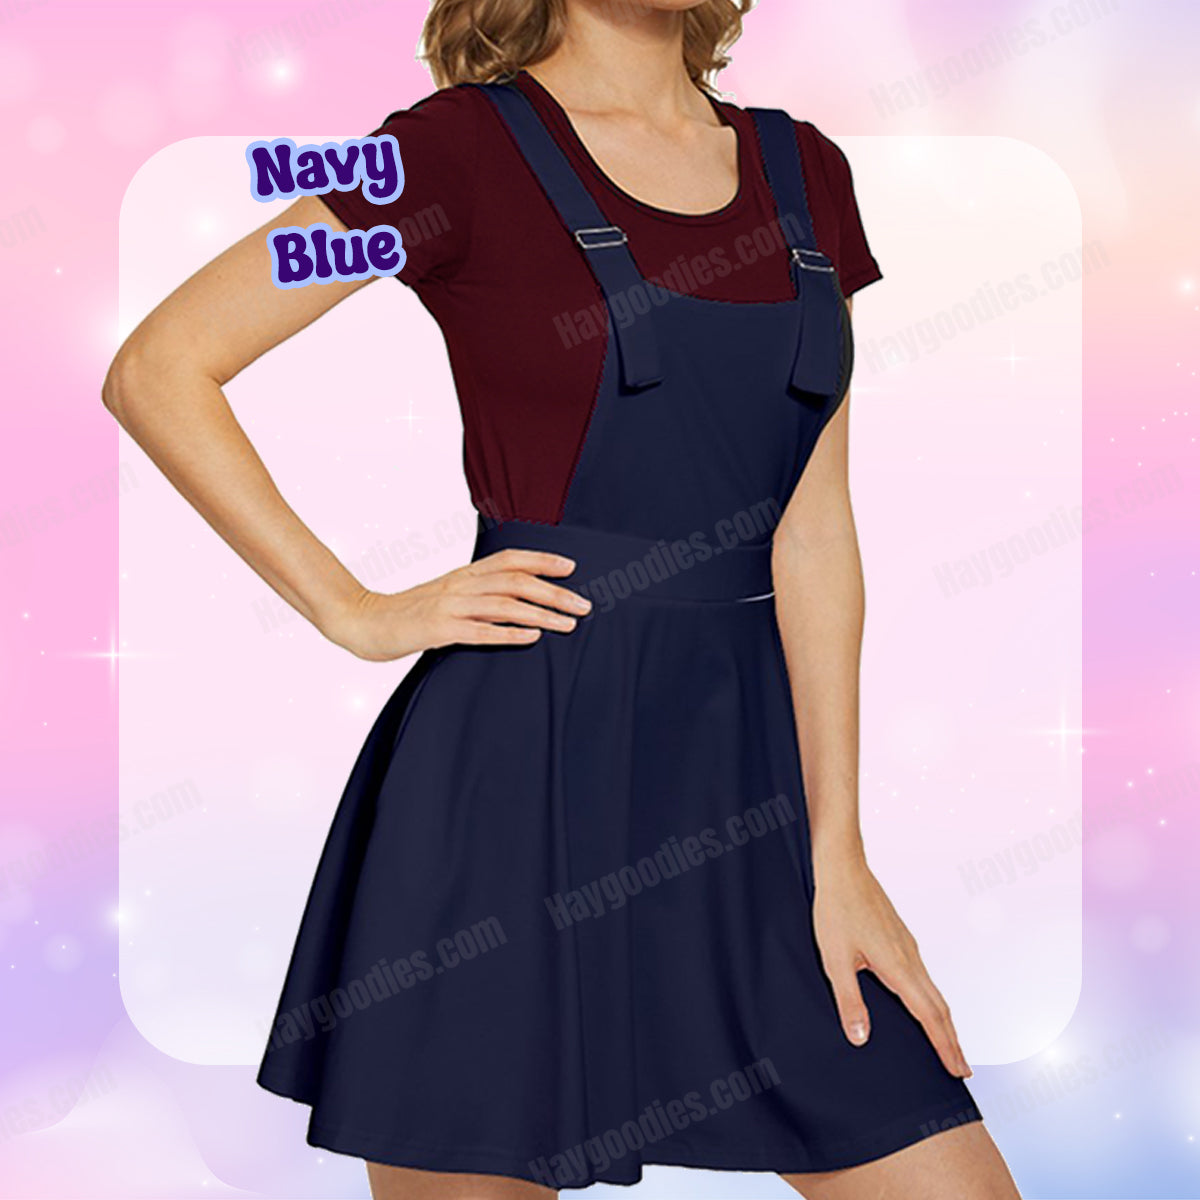 Navy Blue Overalls Dress-XS to 5XL